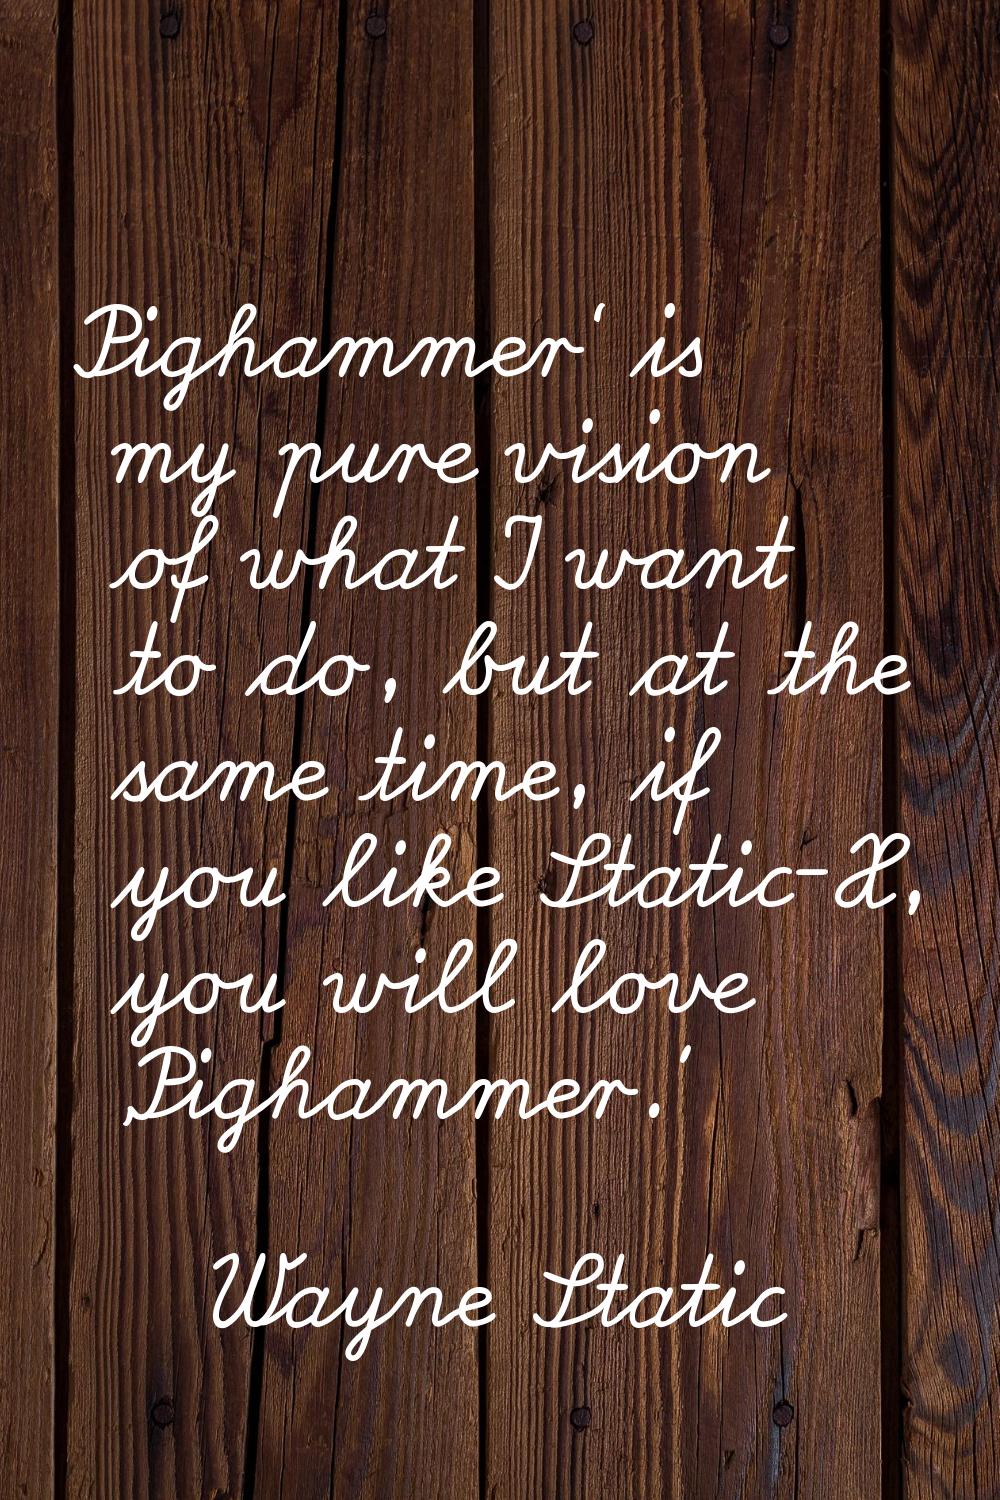 Pighammer' is my pure vision of what I want to do, but at the same time, if you like Static-X, you 